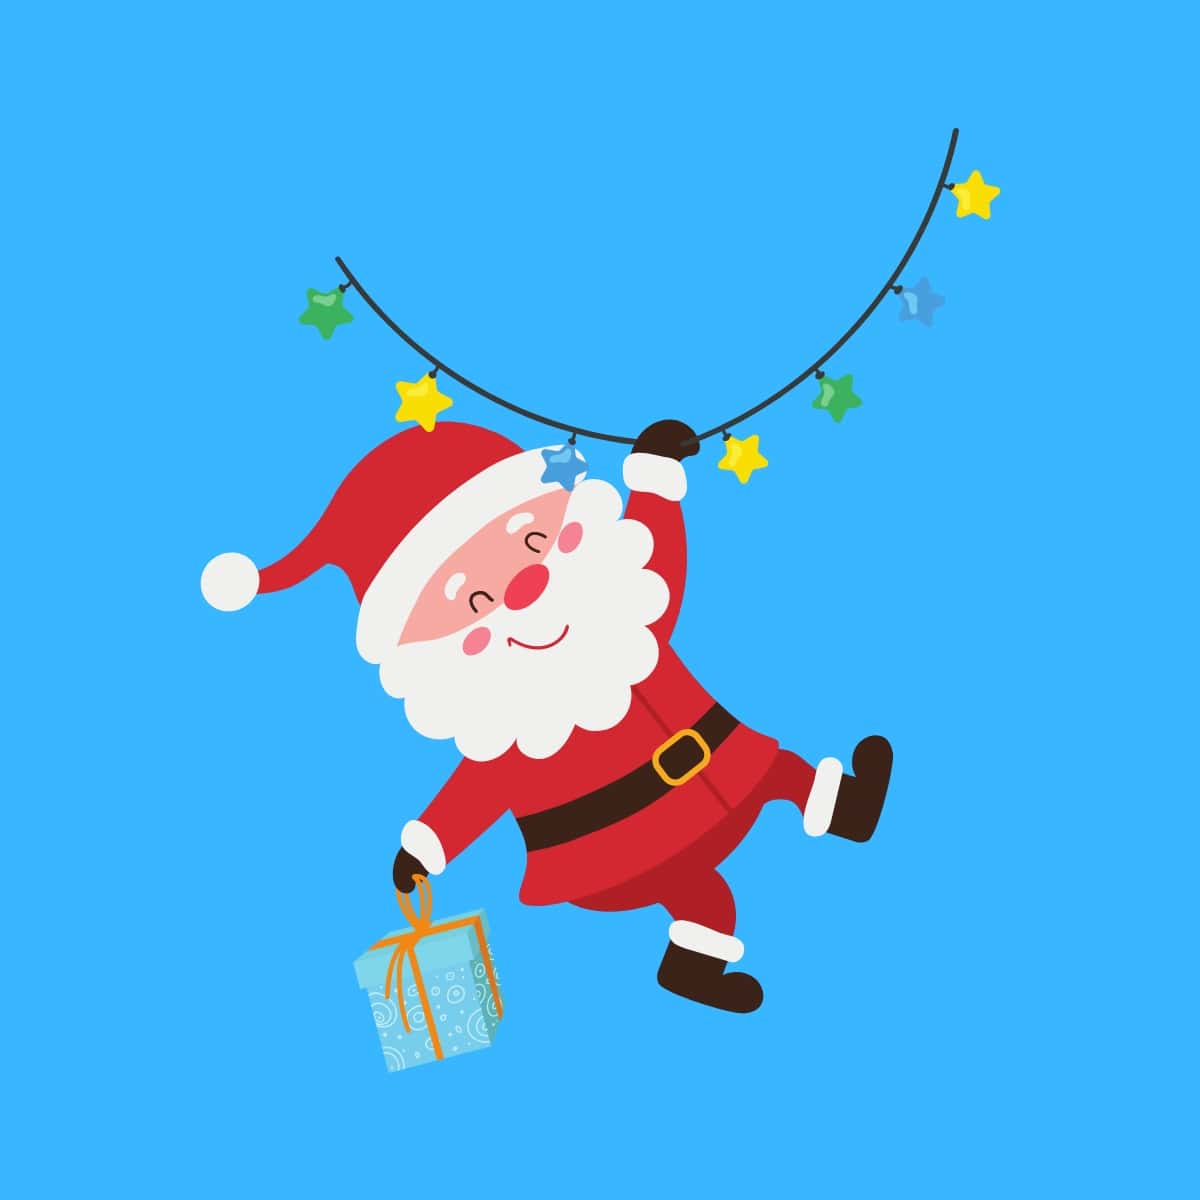 Cartoon graphic of a Santa swinging on Christmas lights on a blue background.